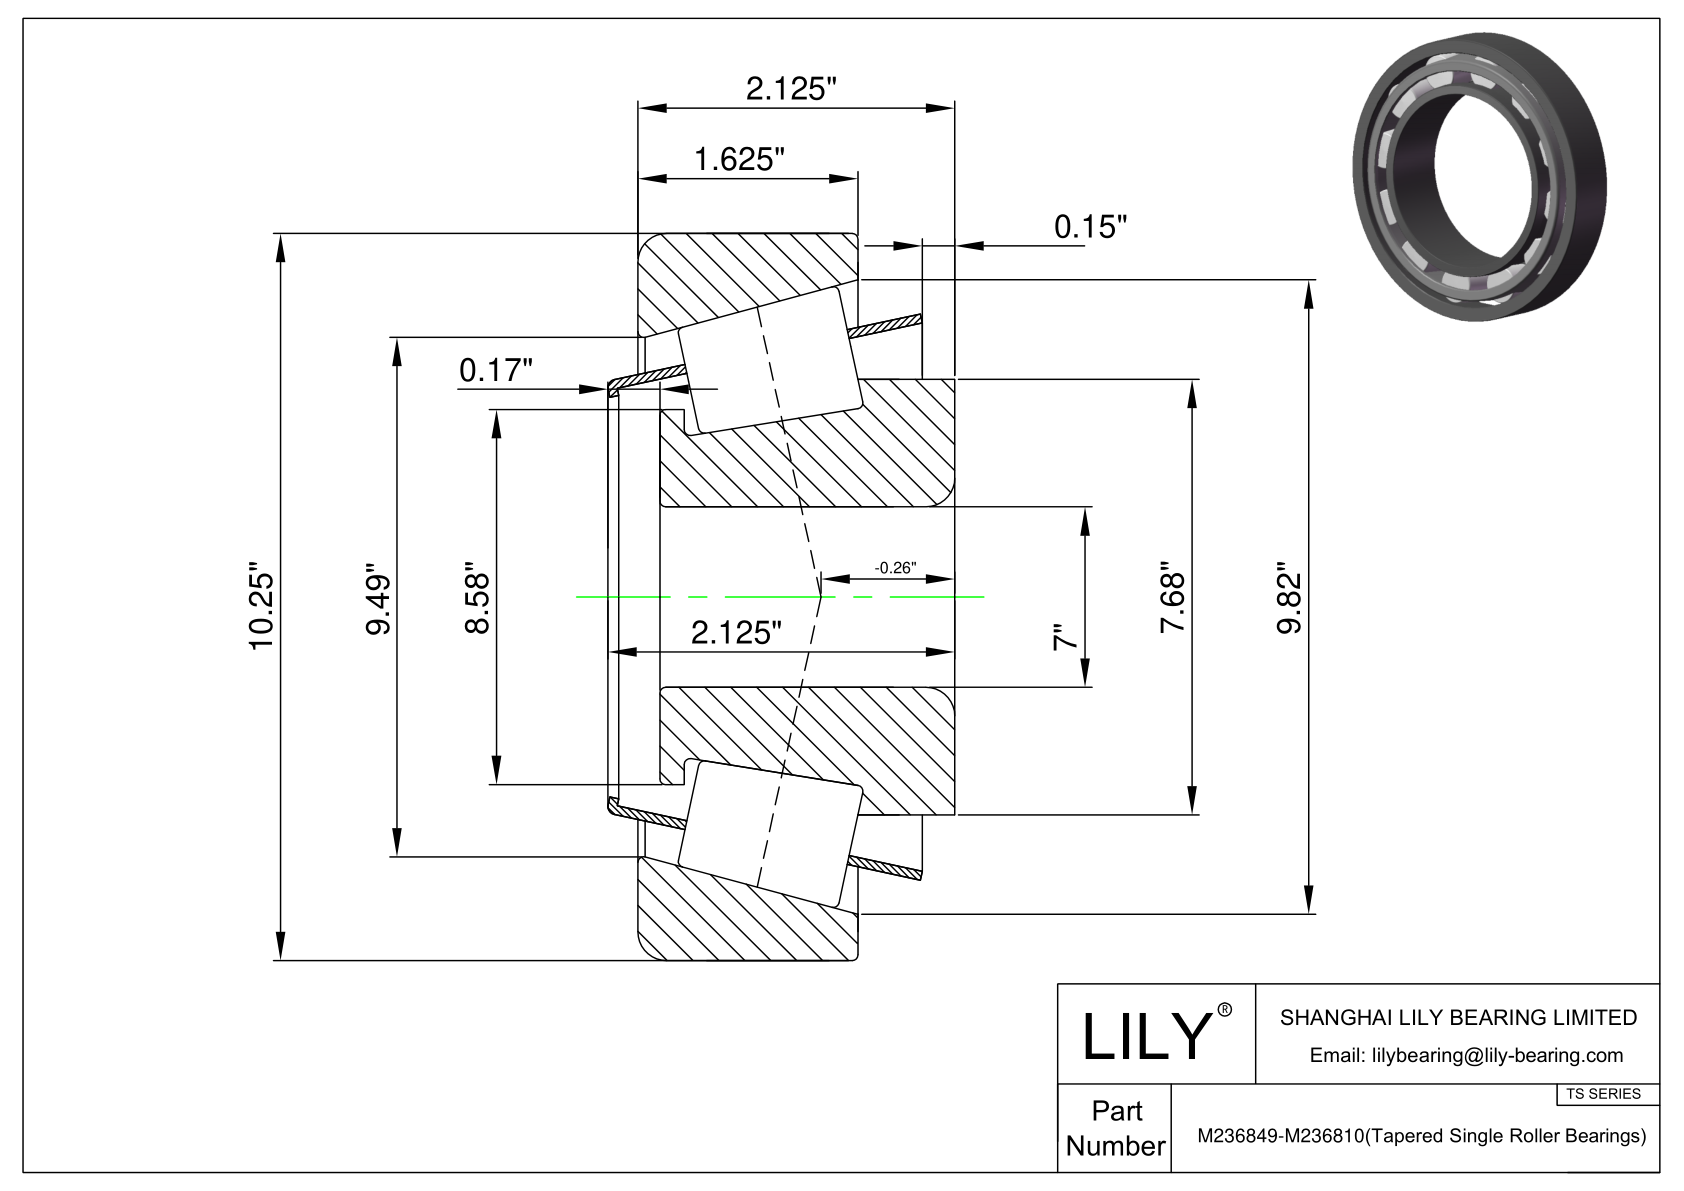 M236849-M236810 TS (Tapered Single Roller Bearings) (Imperial) cad drawing